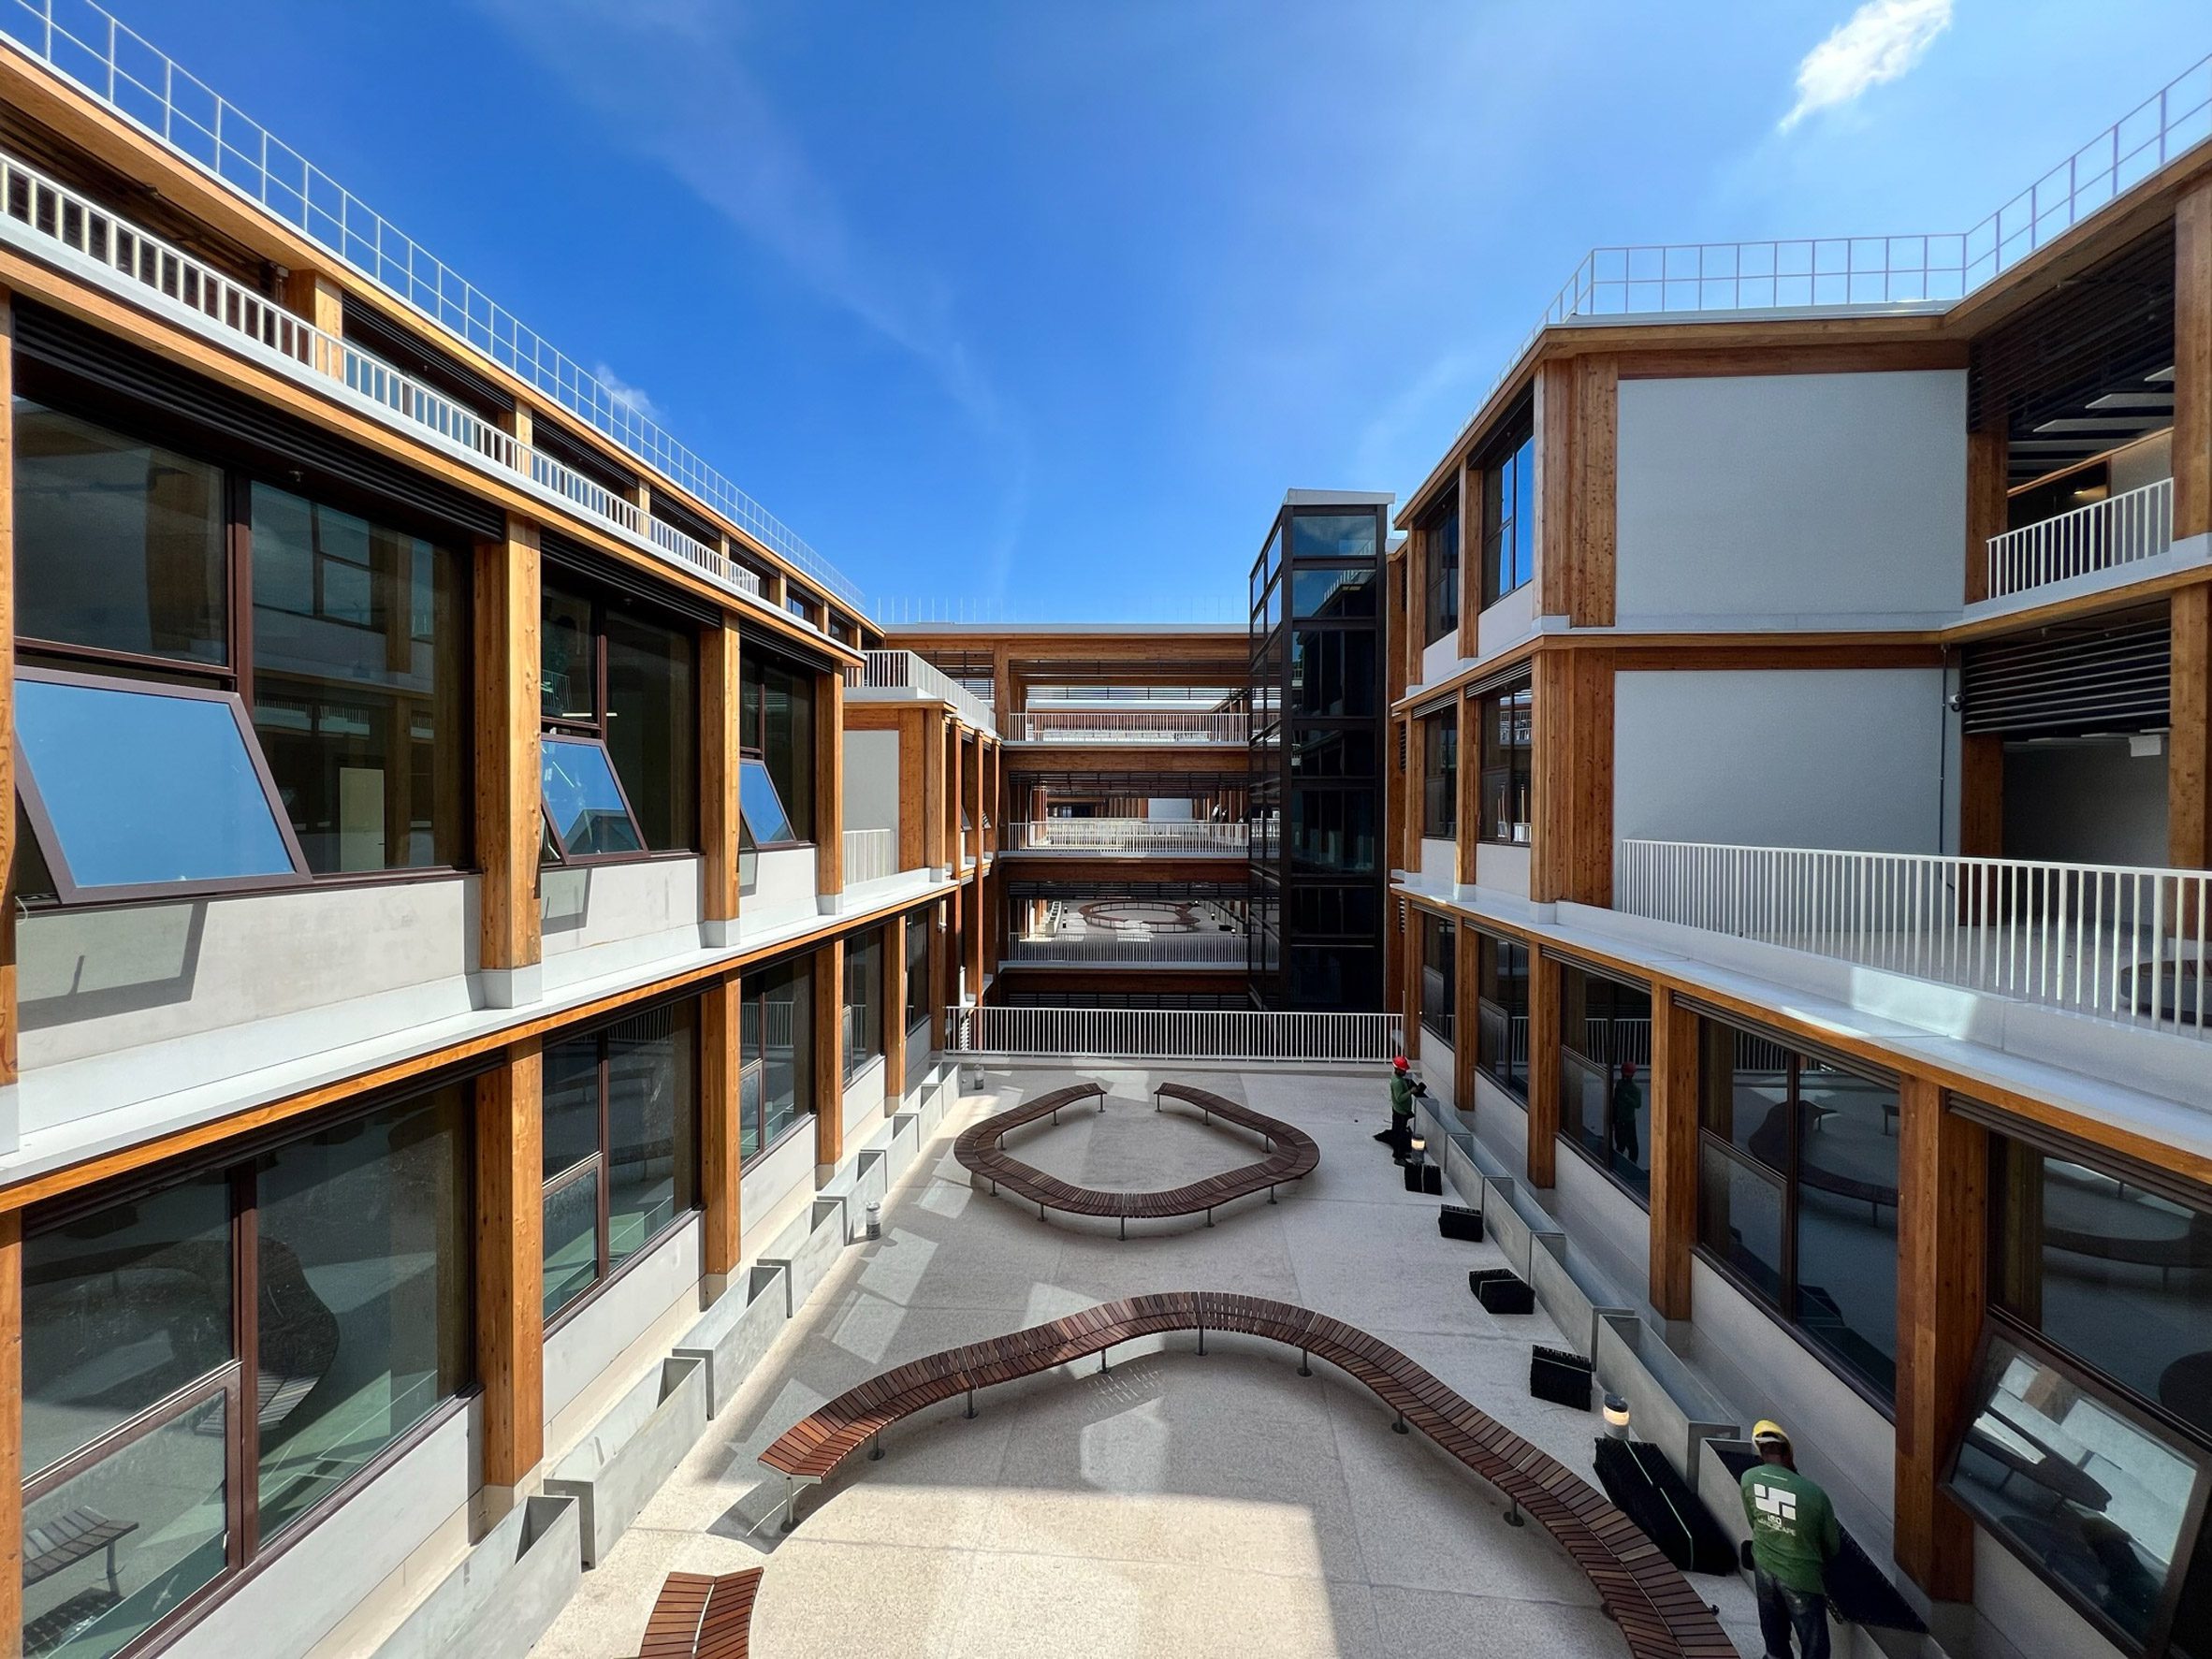 Courtyard of university building by Toyo Ito